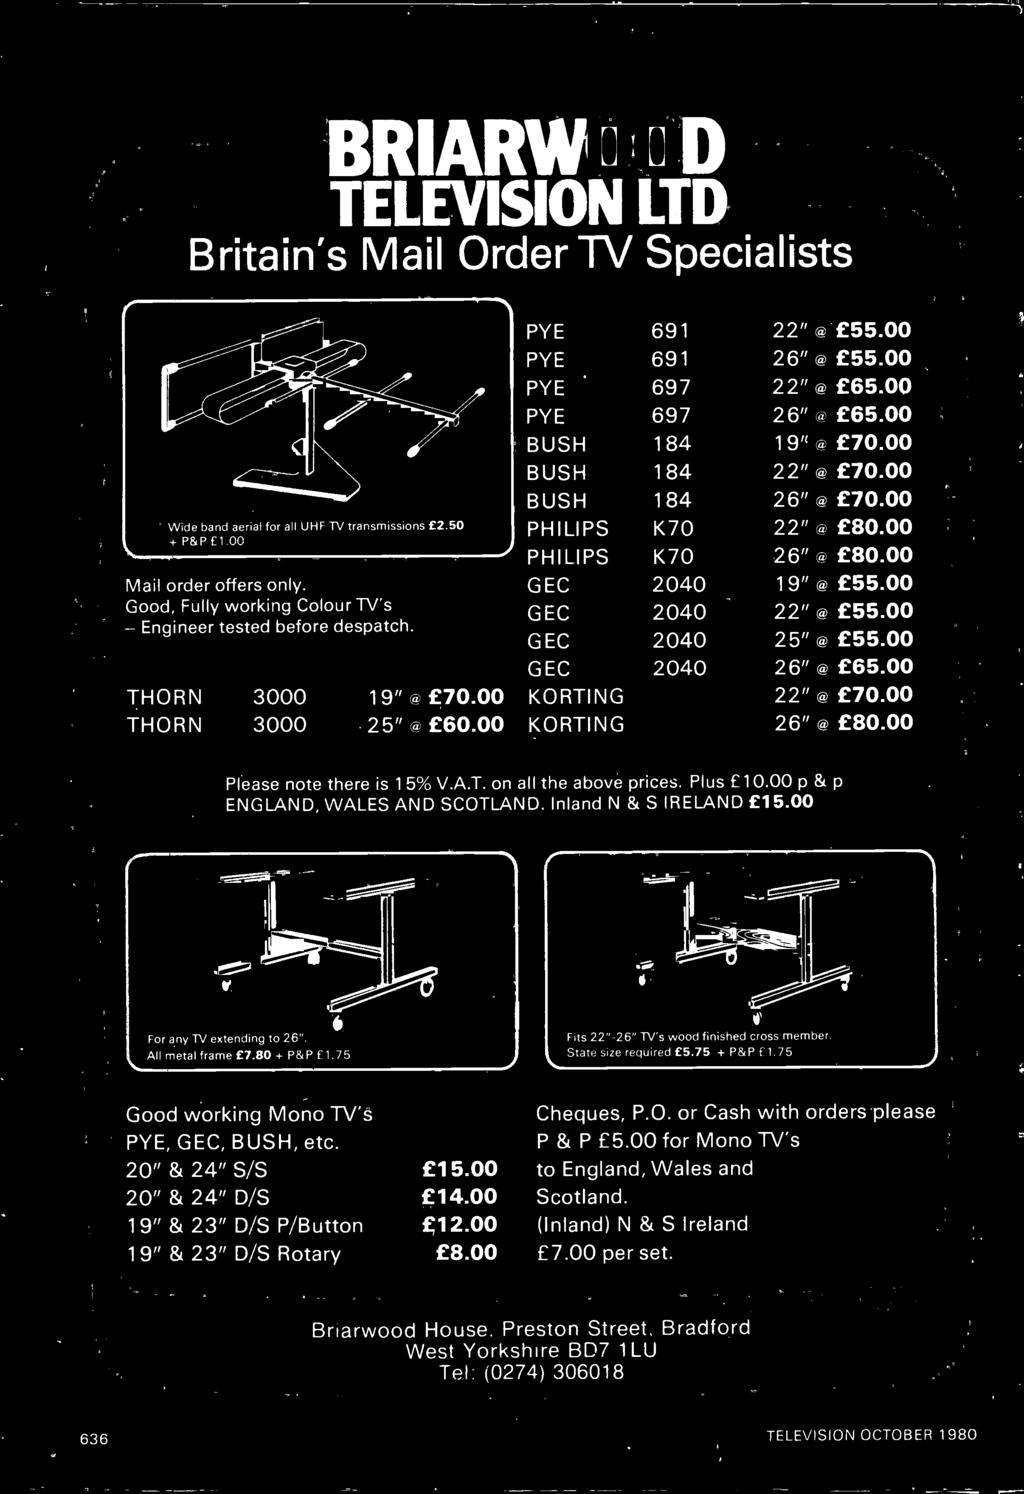 00 For any TV extending to 26". All metal frame 7.80 - P&P f 1.75 Fits 22"-26" TV's wood finished cross member. State size required 5.75 P&P 1.75 Good working Mono TV's PYE, GEC, BUSH, etc.